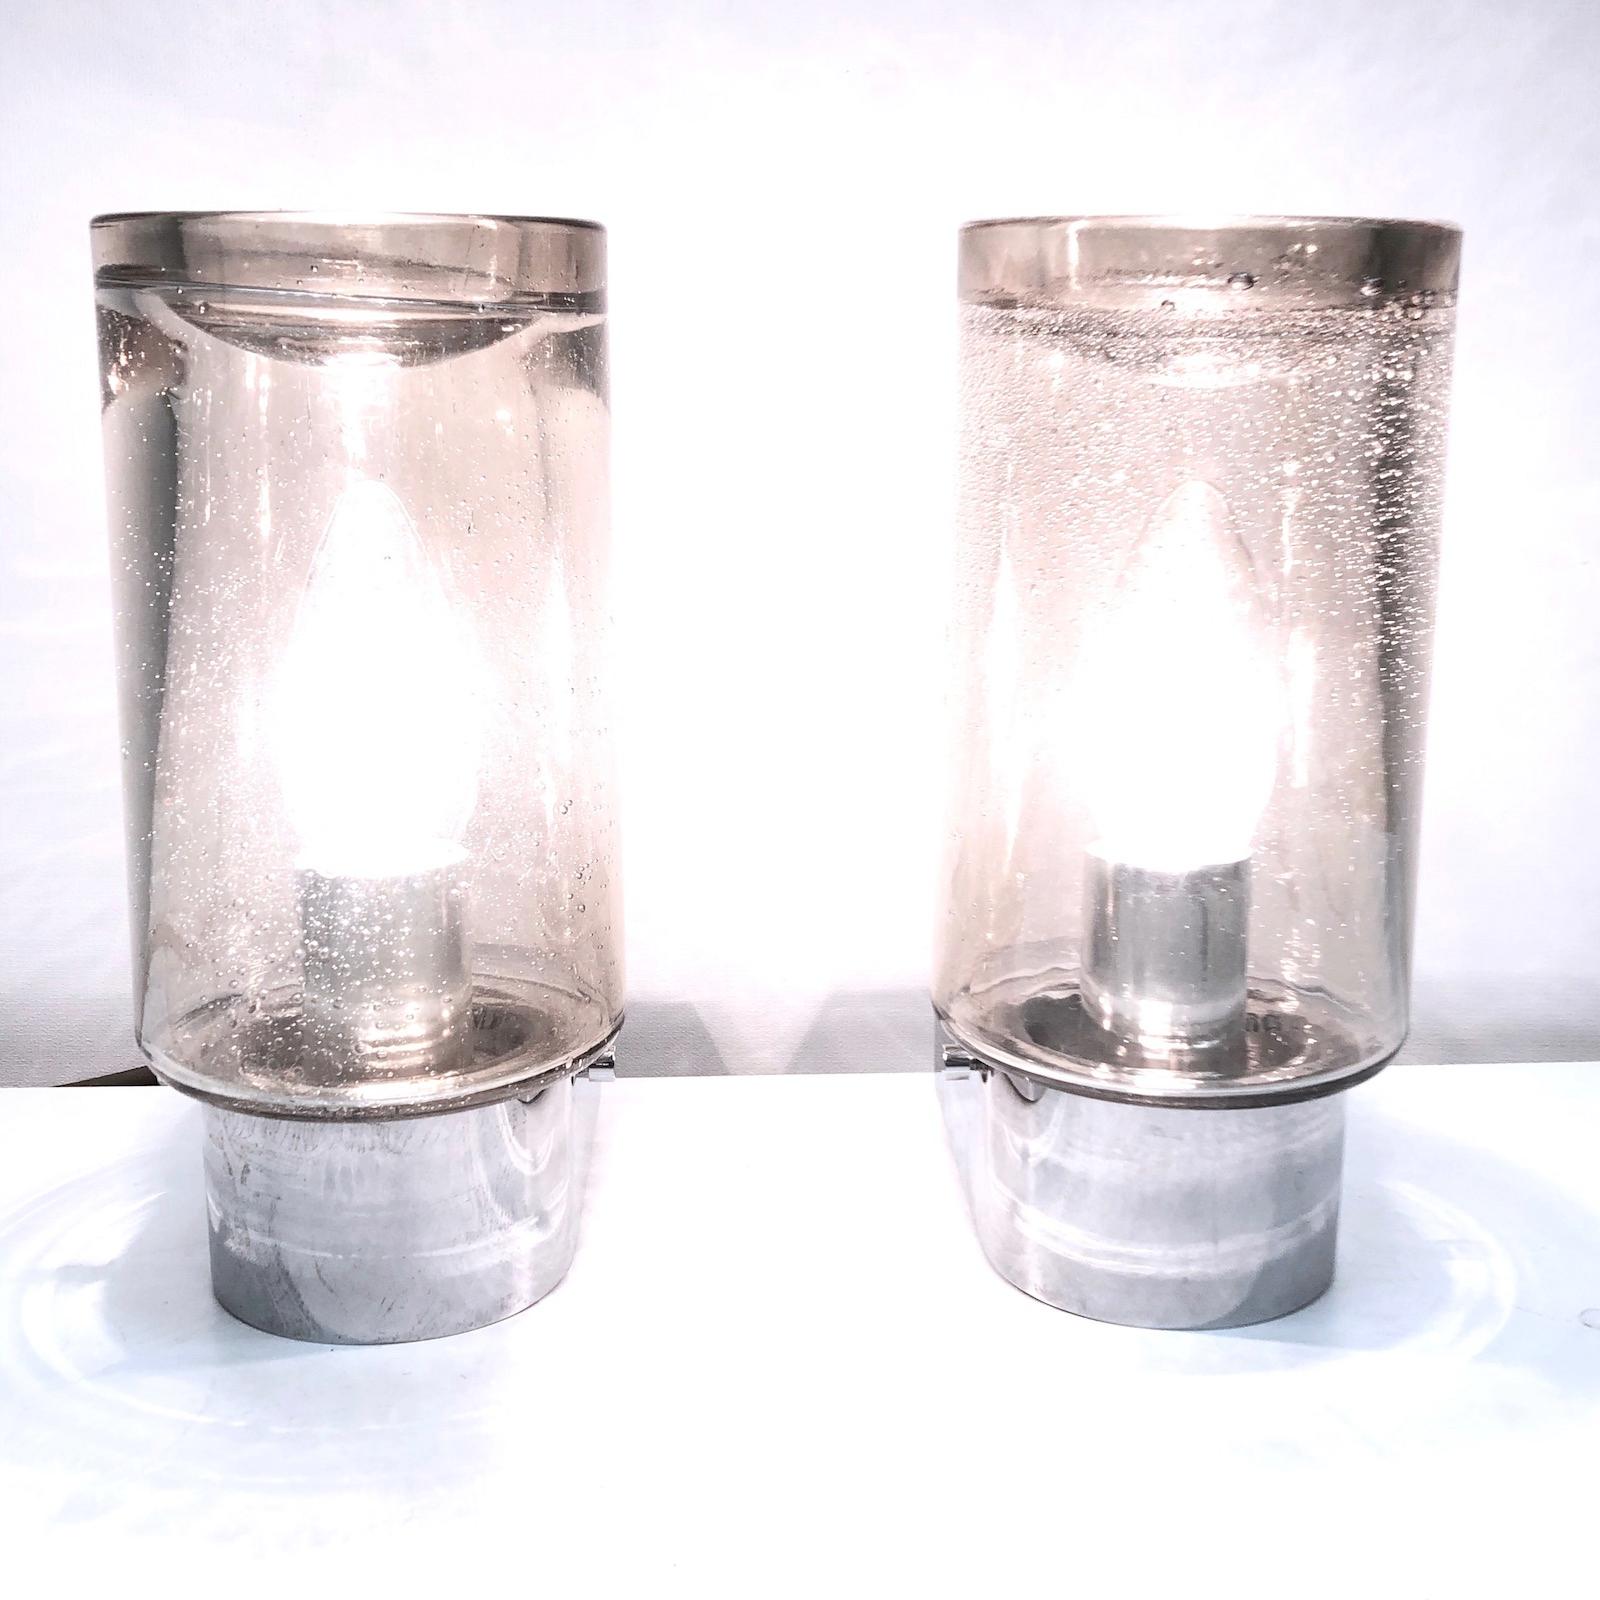 Petite sconces manufactured by Glashütte Limburg. It is a smoked tone glass on a chromed metal frame. Each fixture requires one European E14 / 110 Volt candelabra bulb, each bulb up to 40 watts.